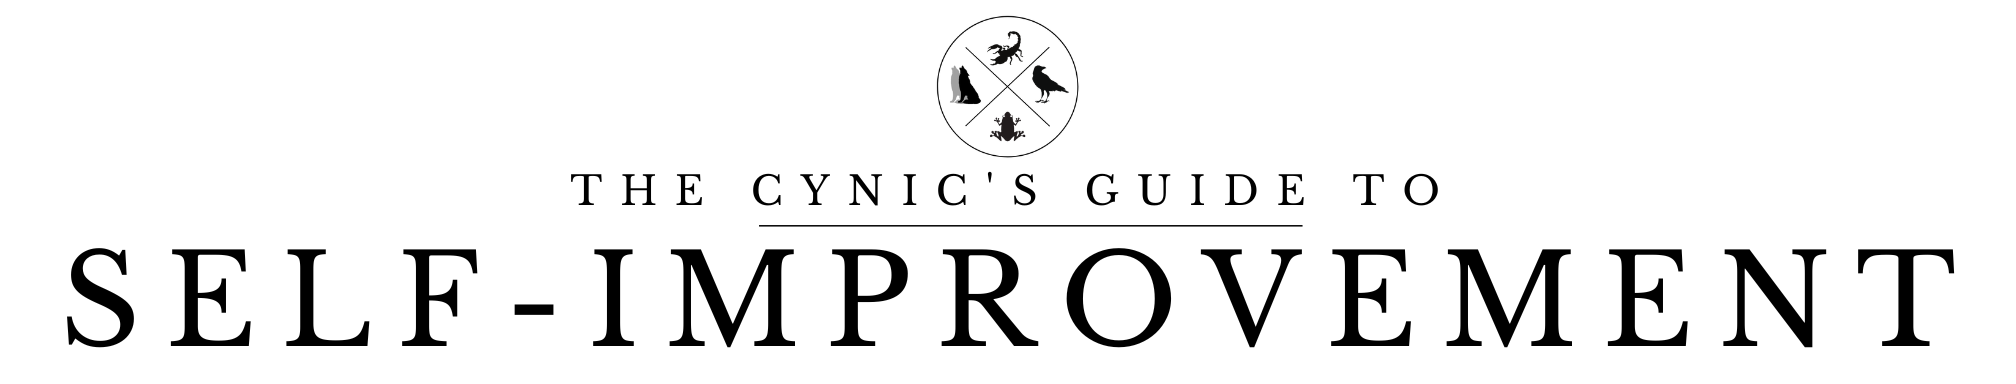 The wordmark for the Cynic's Guide to Self-Improvement